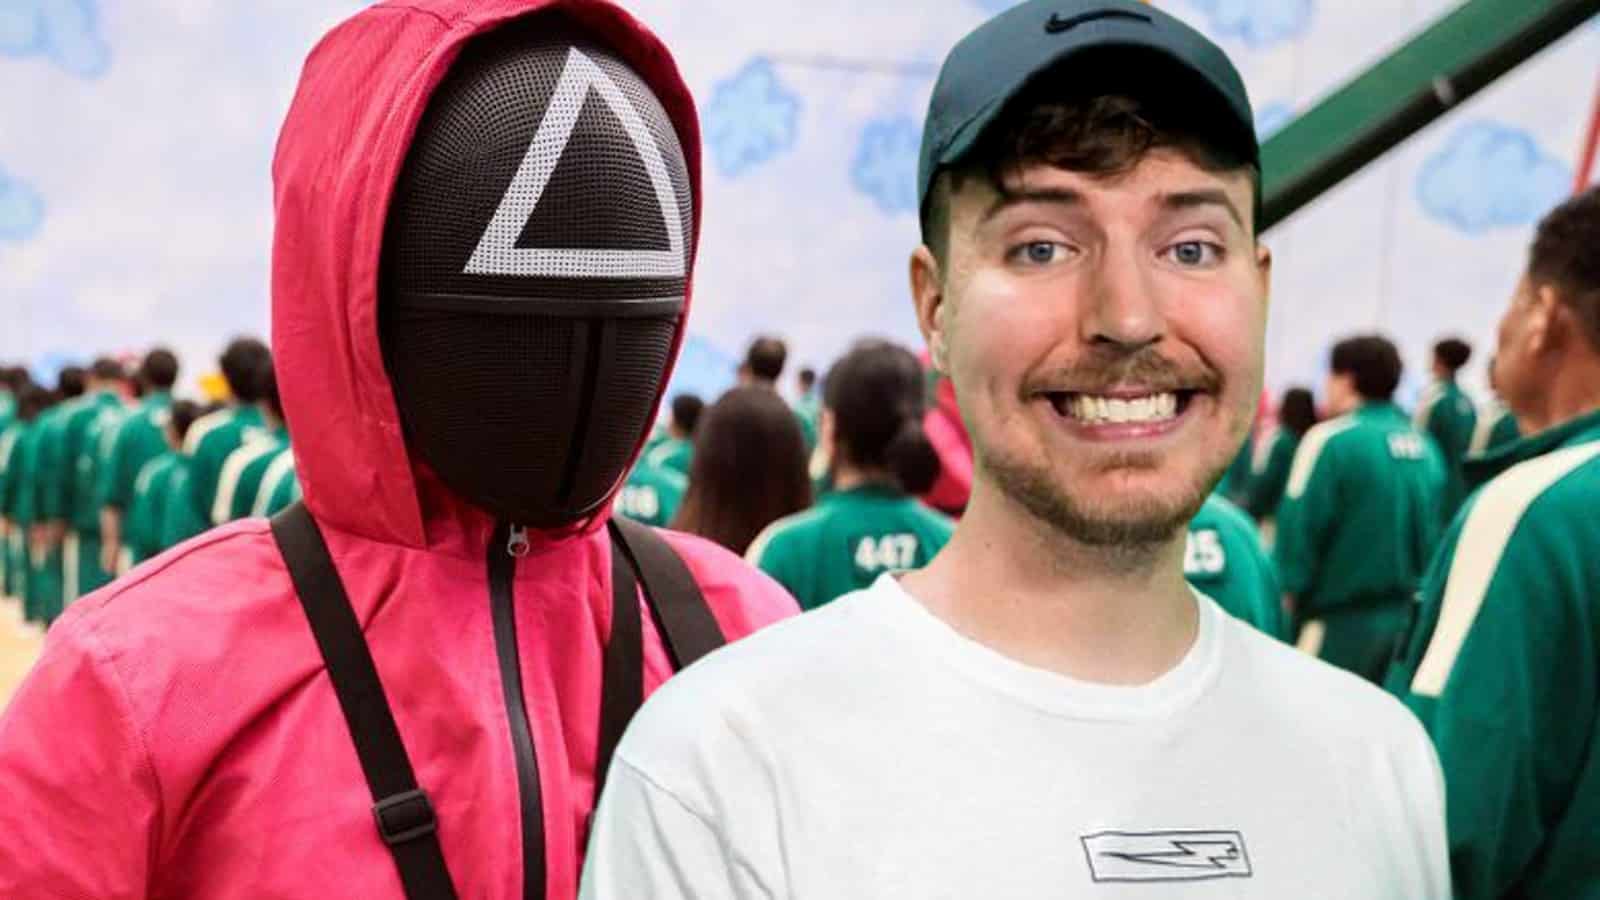 MrBeast's Real Life Squid Game video increased Brawl Stars downloads 4.5 times in the US | Game Industry News